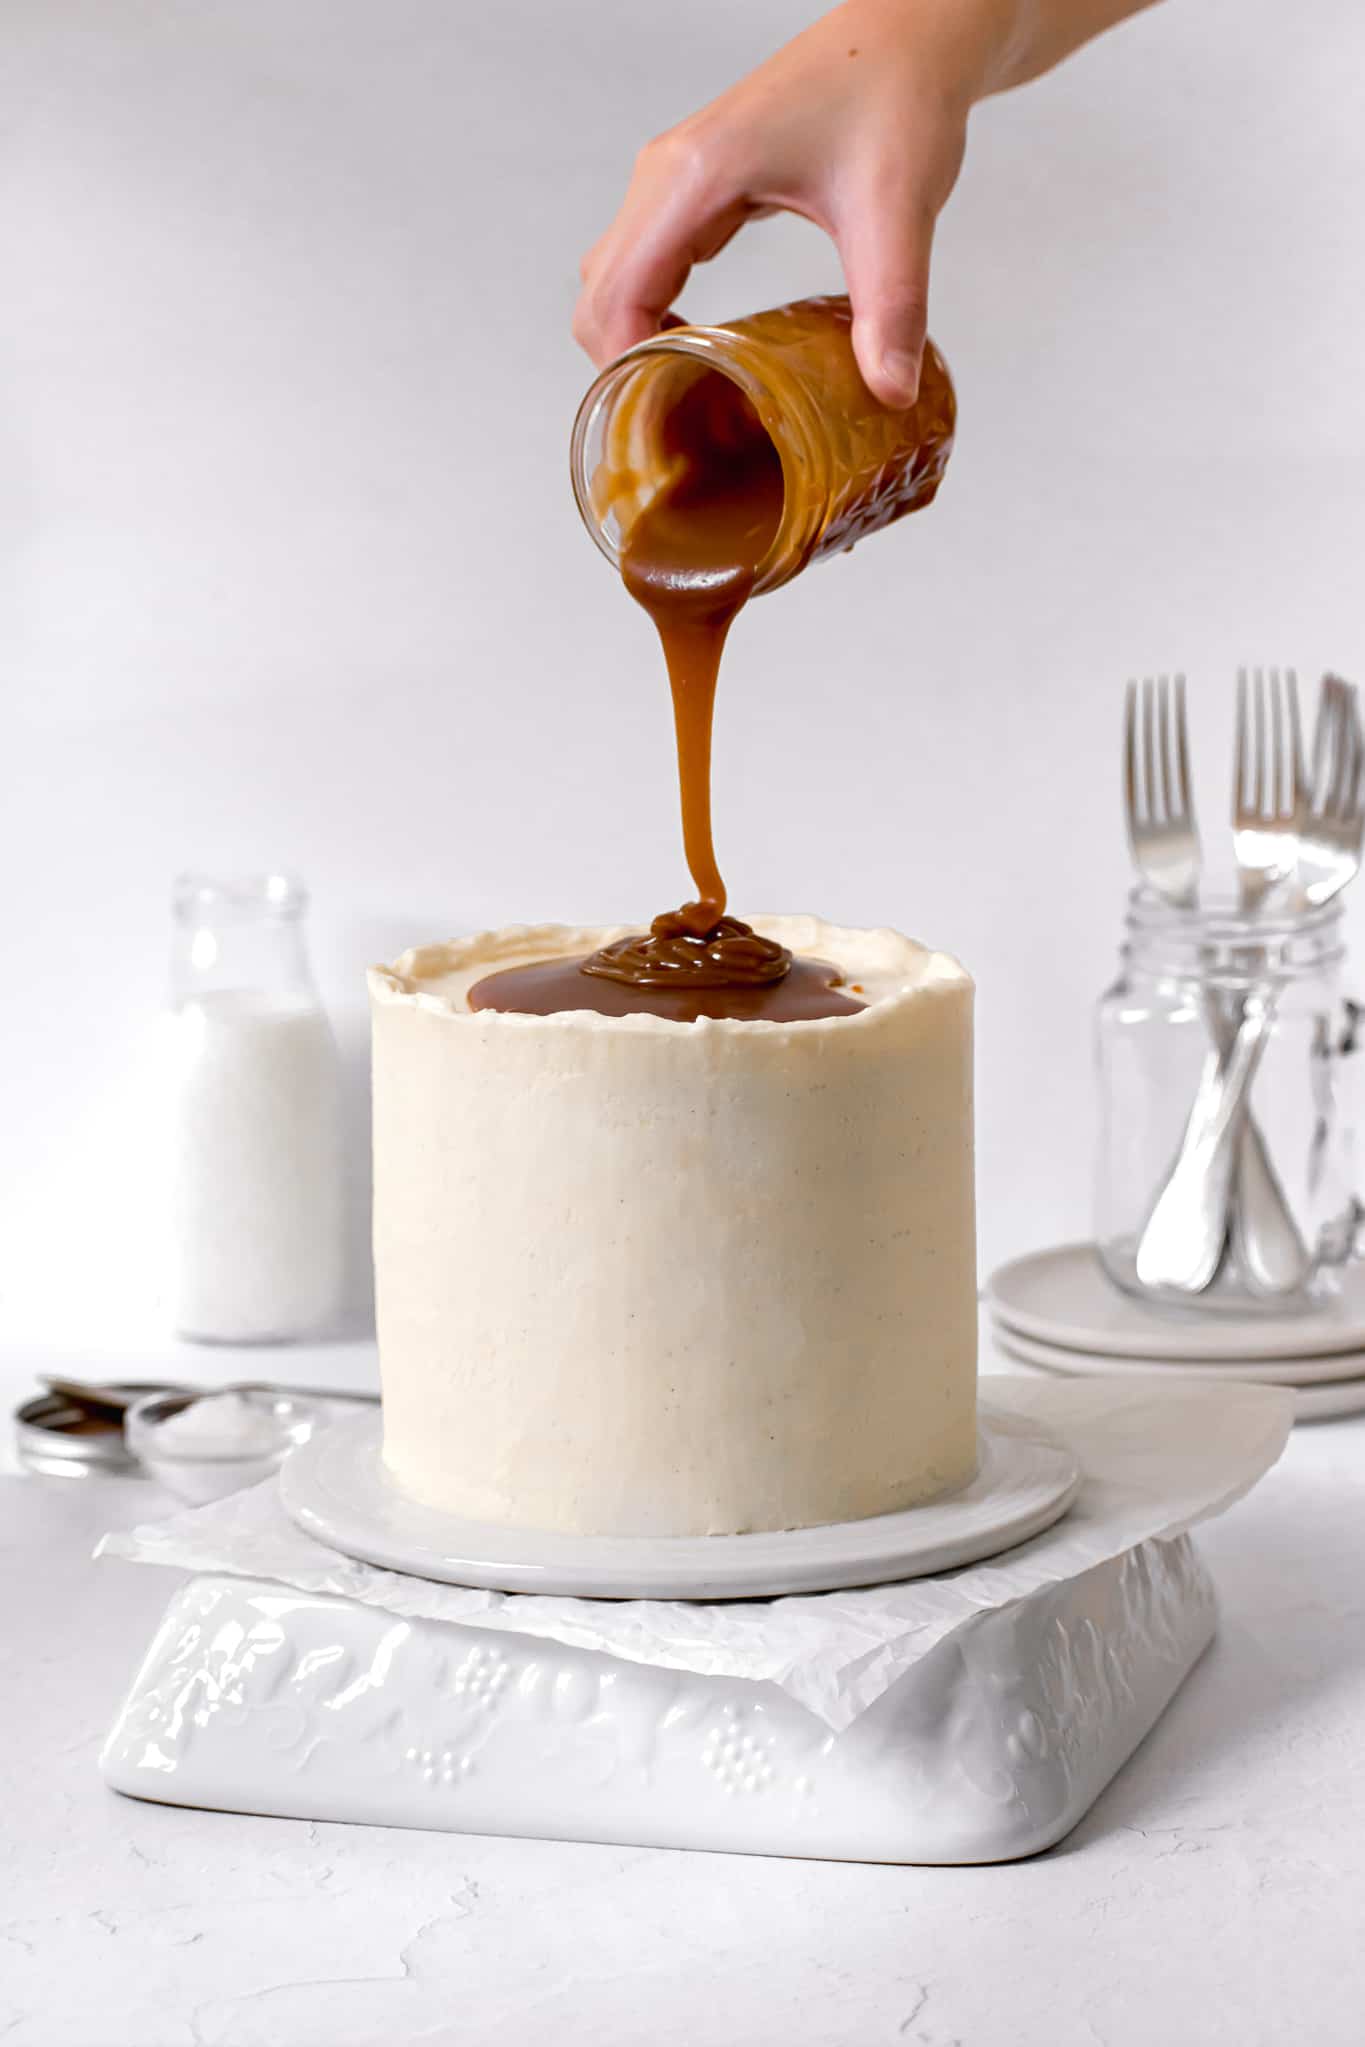 caramel layer cake with caramel sauce being poured on top.